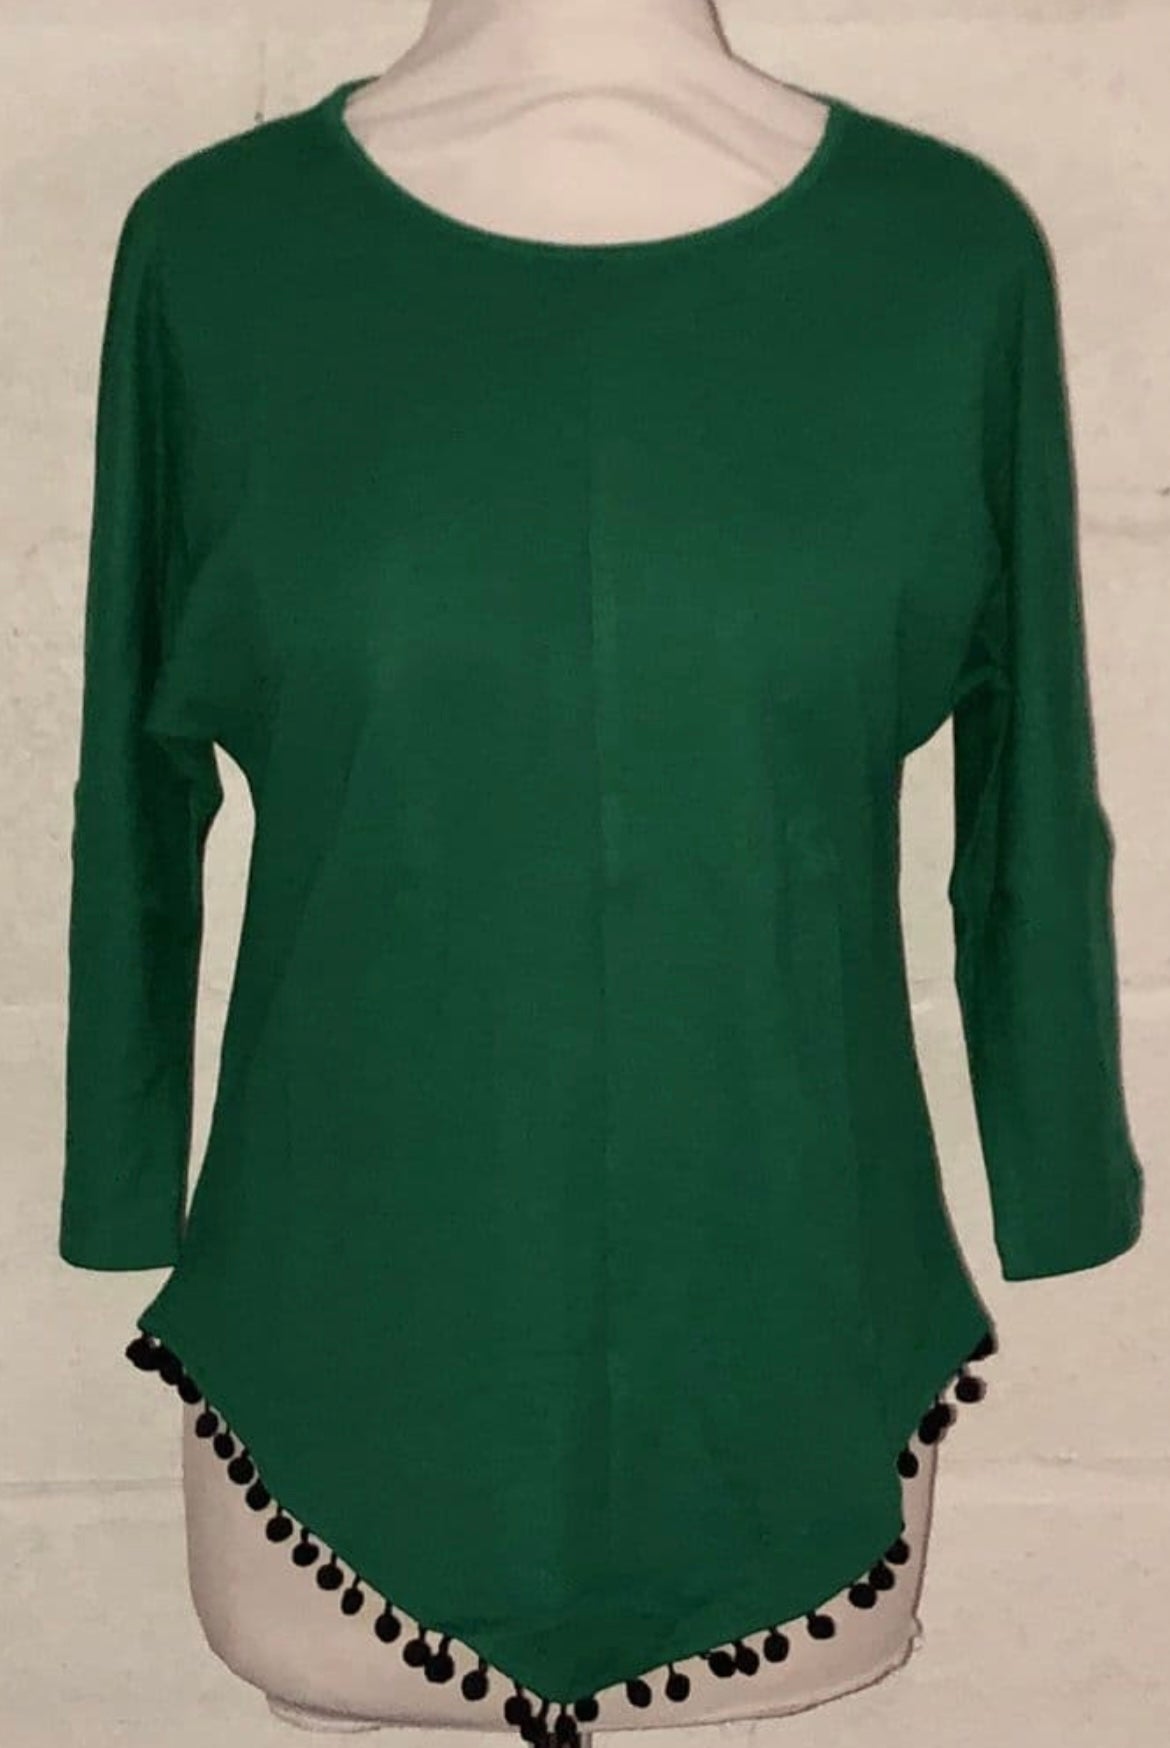 Beatnik pullover Vintage style top XS to 2XL